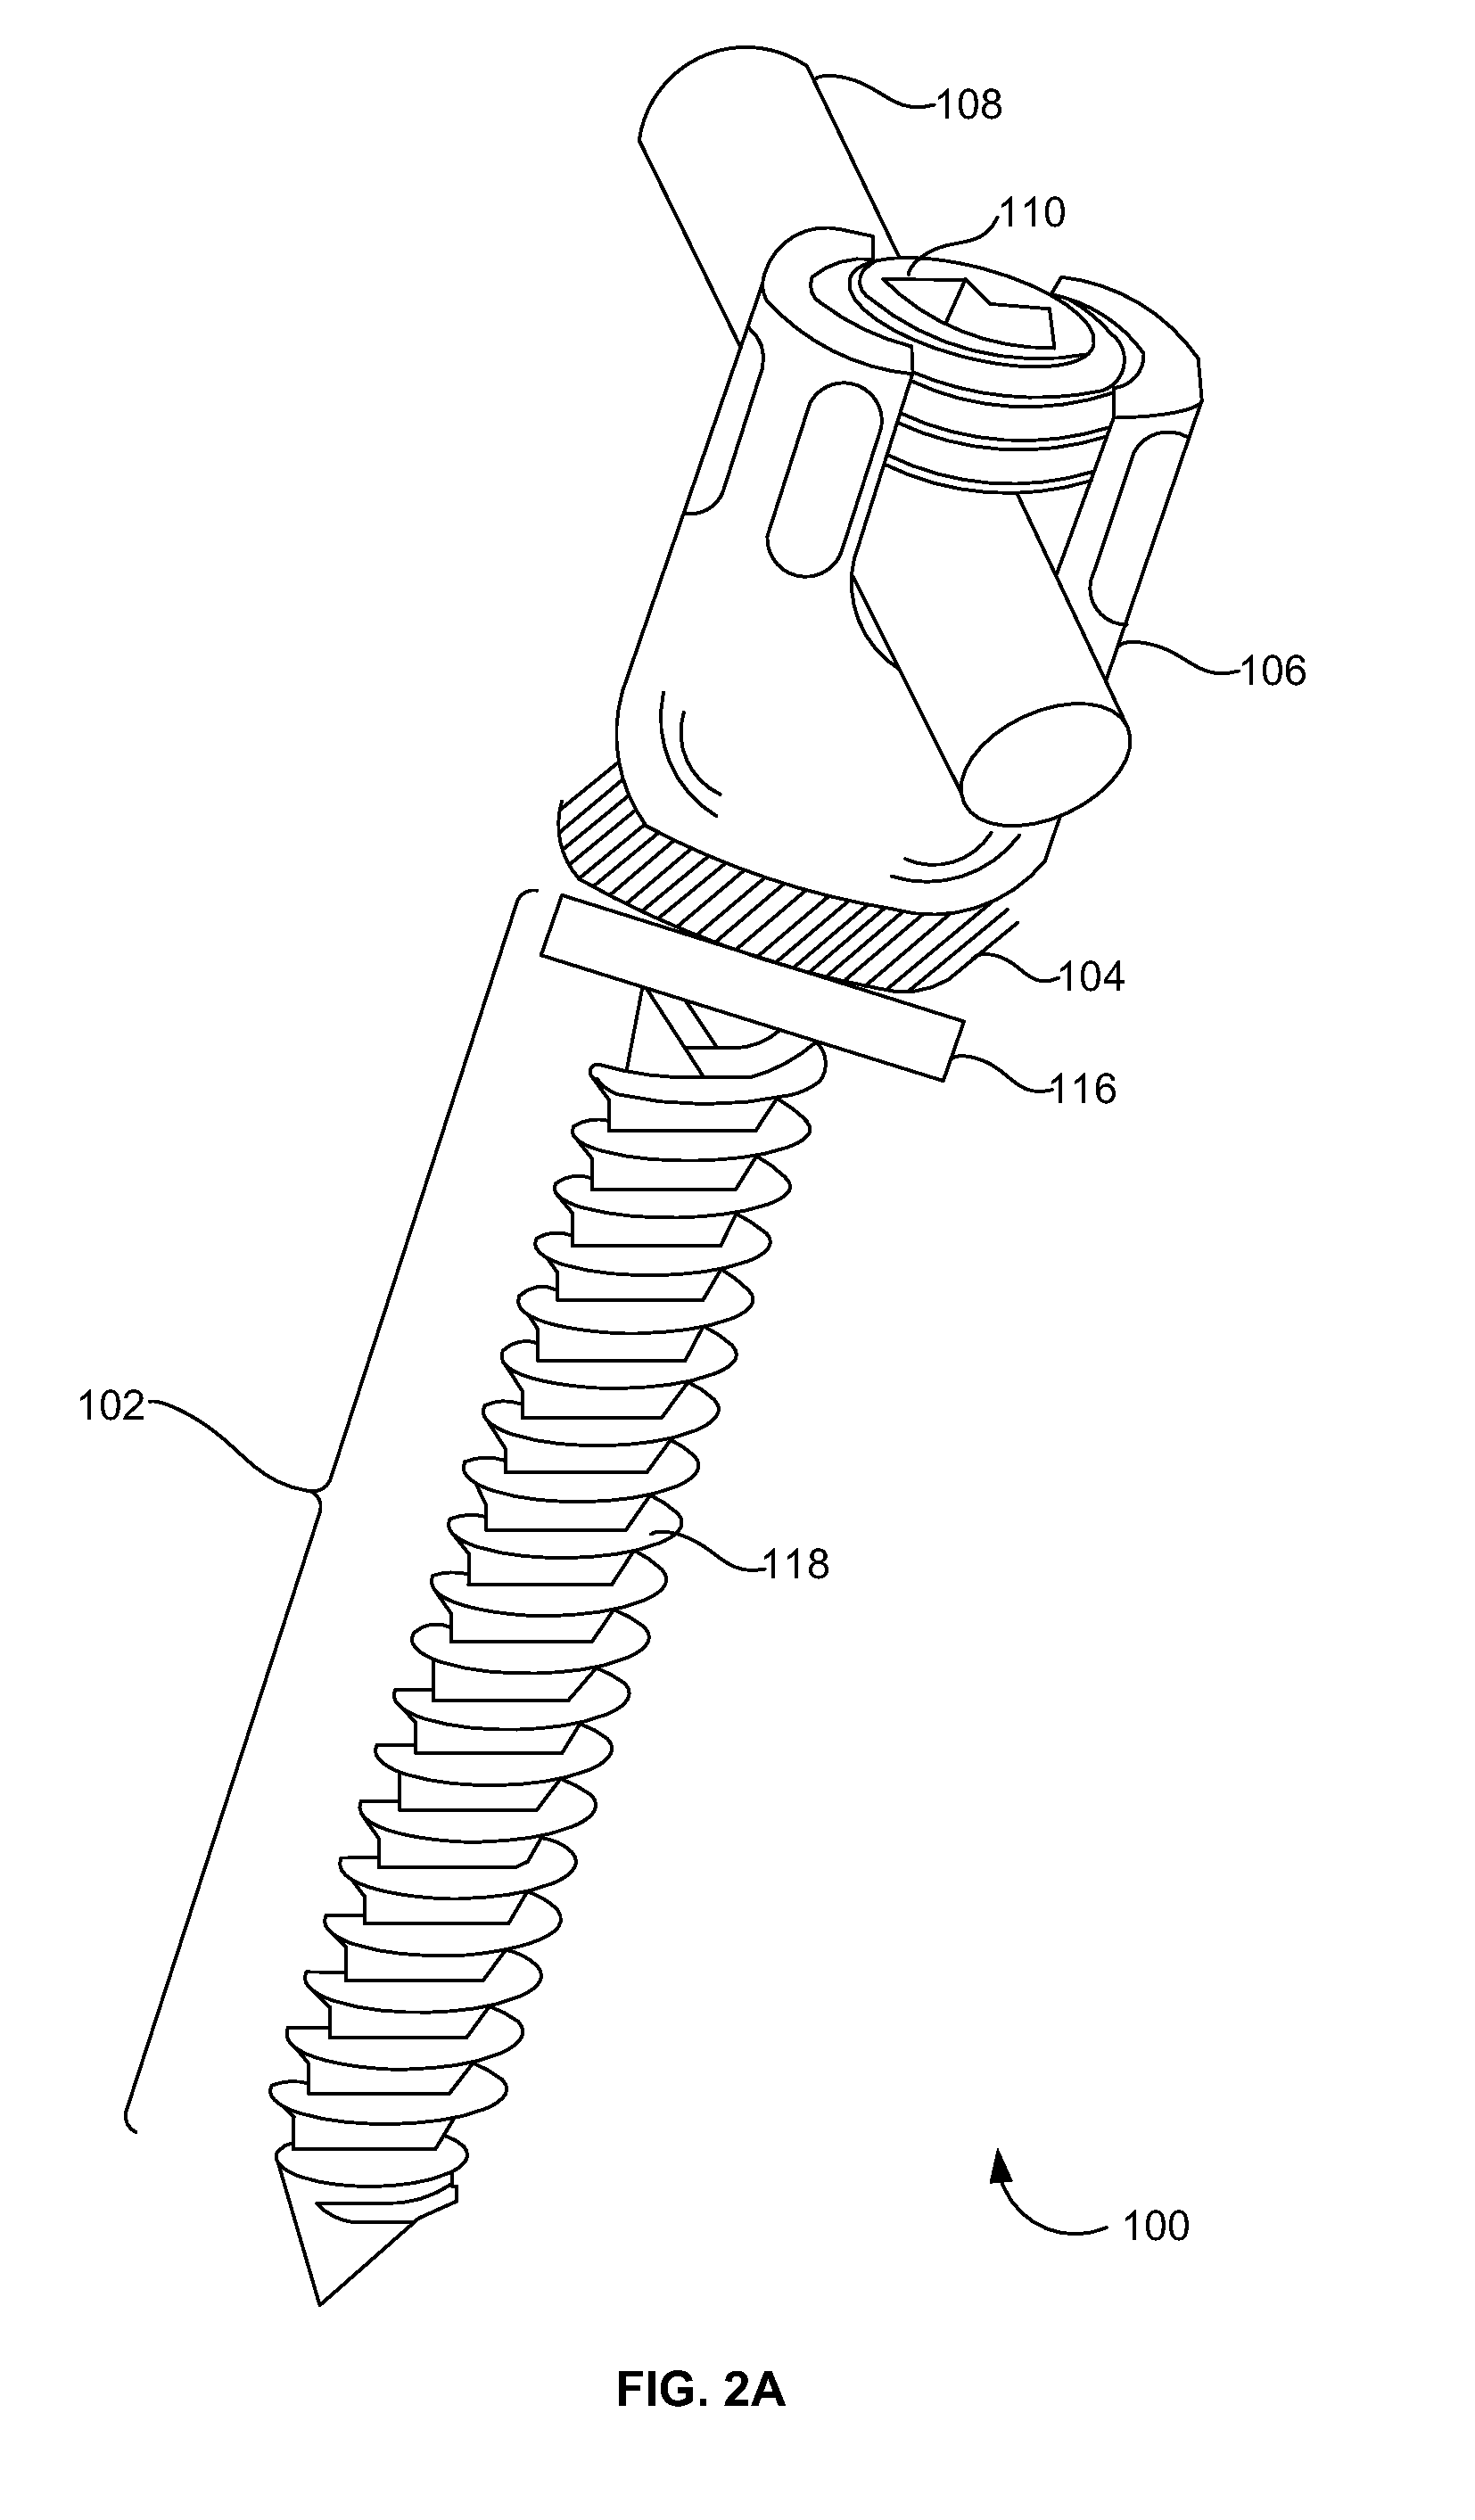 Spring-loaded dynamic pedicle screw assembly